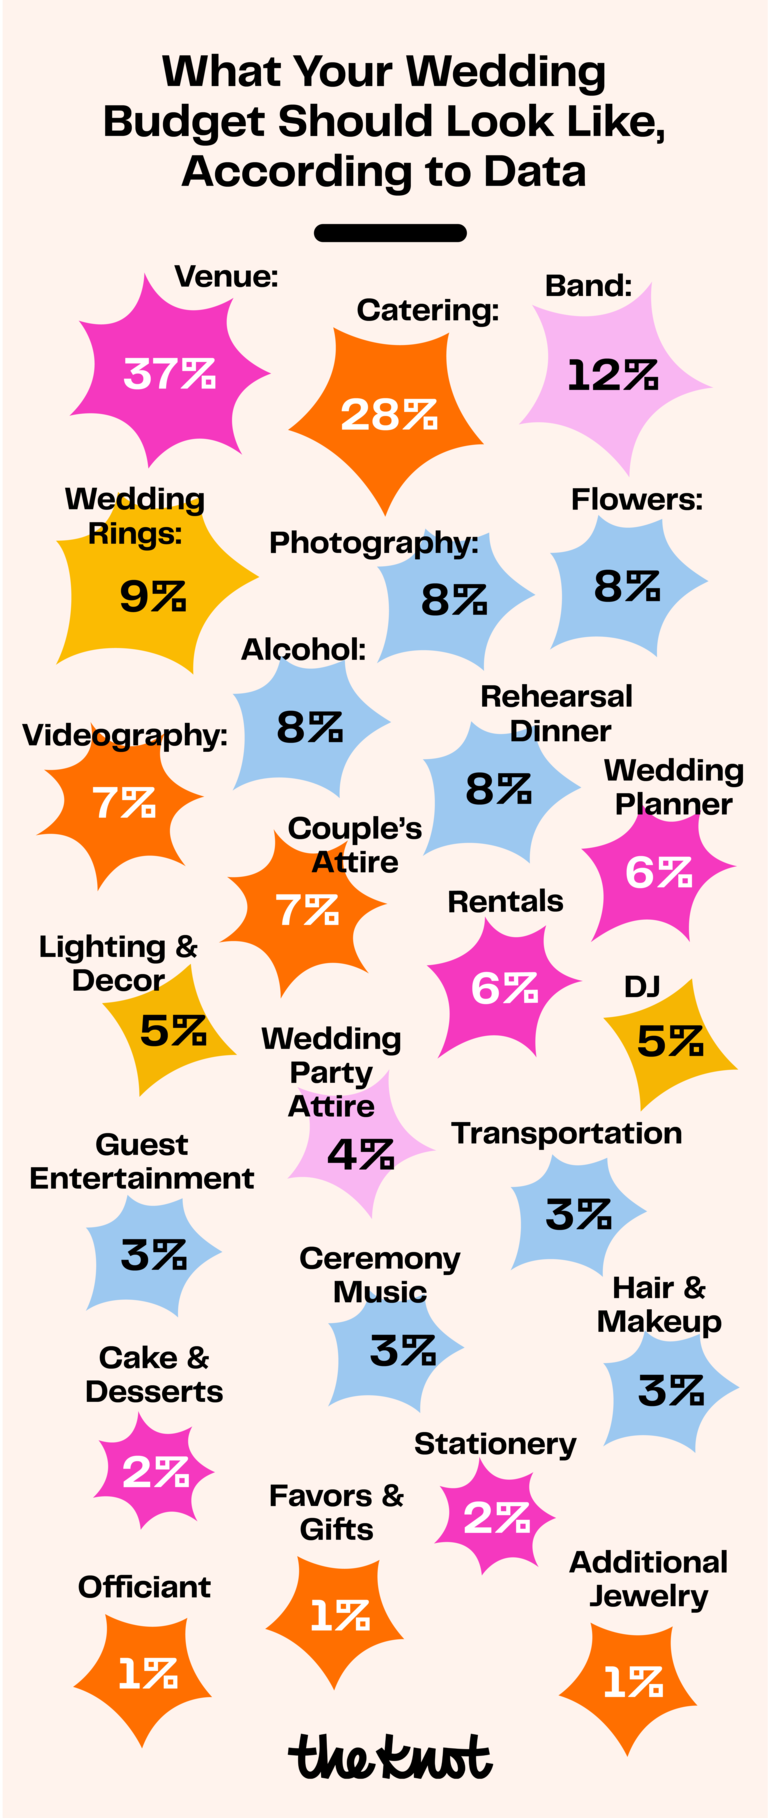 Free, Printable Wedding Budget Breakdown from Real Couples' Data